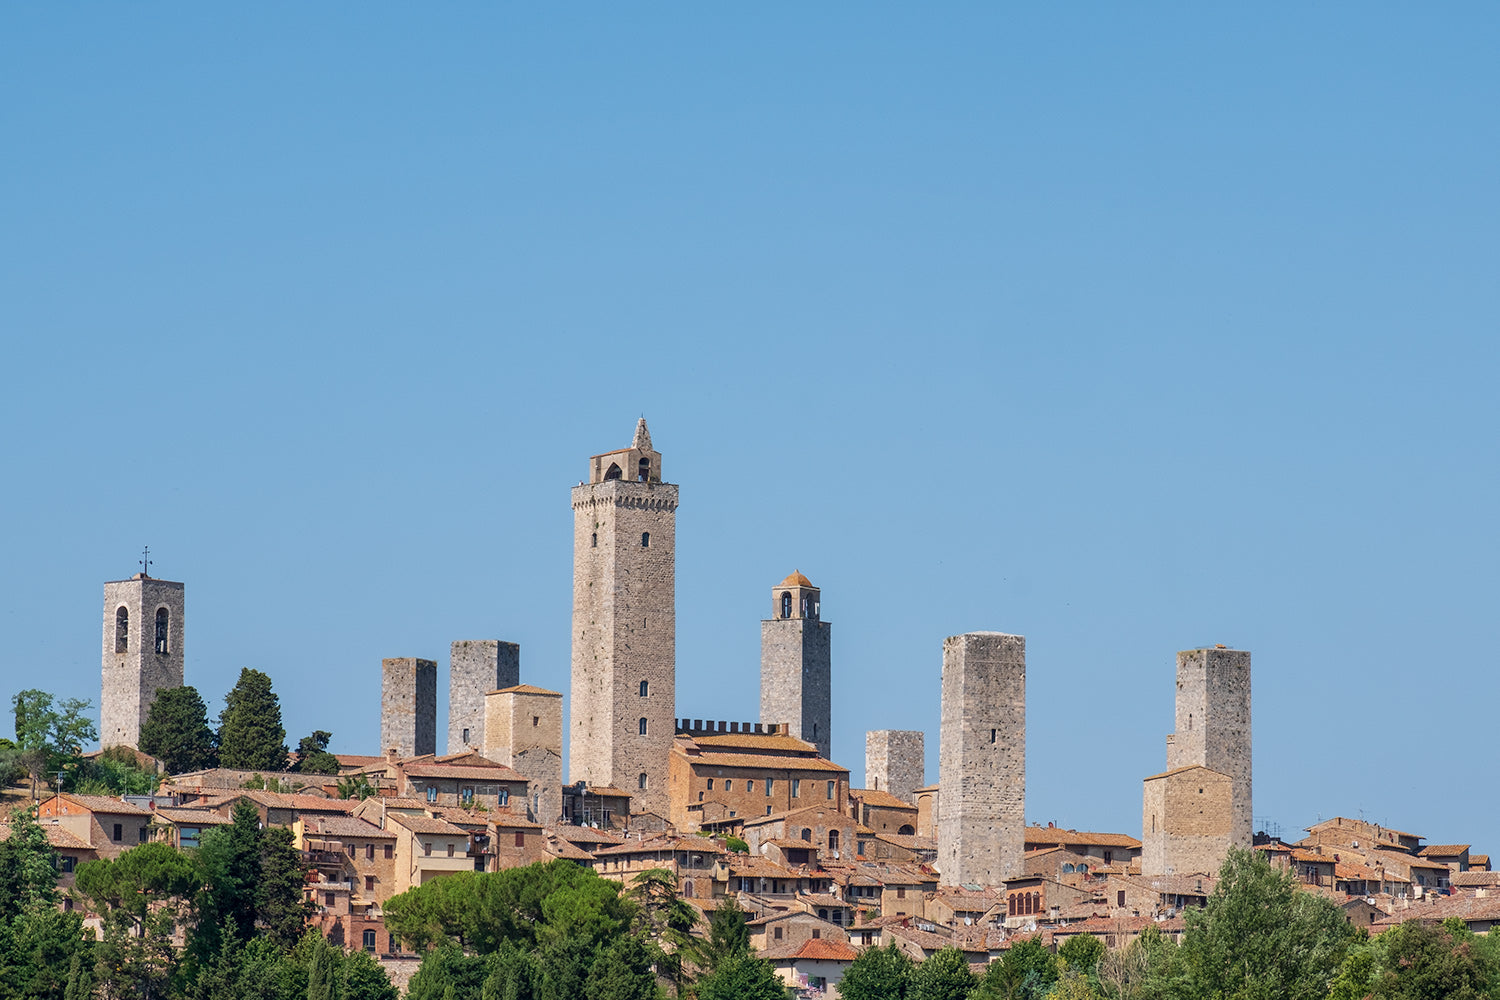 A clear blue sky behind the medieval town of San Gimignano in the province of Siena, Italy. A series of towers loom above the town.